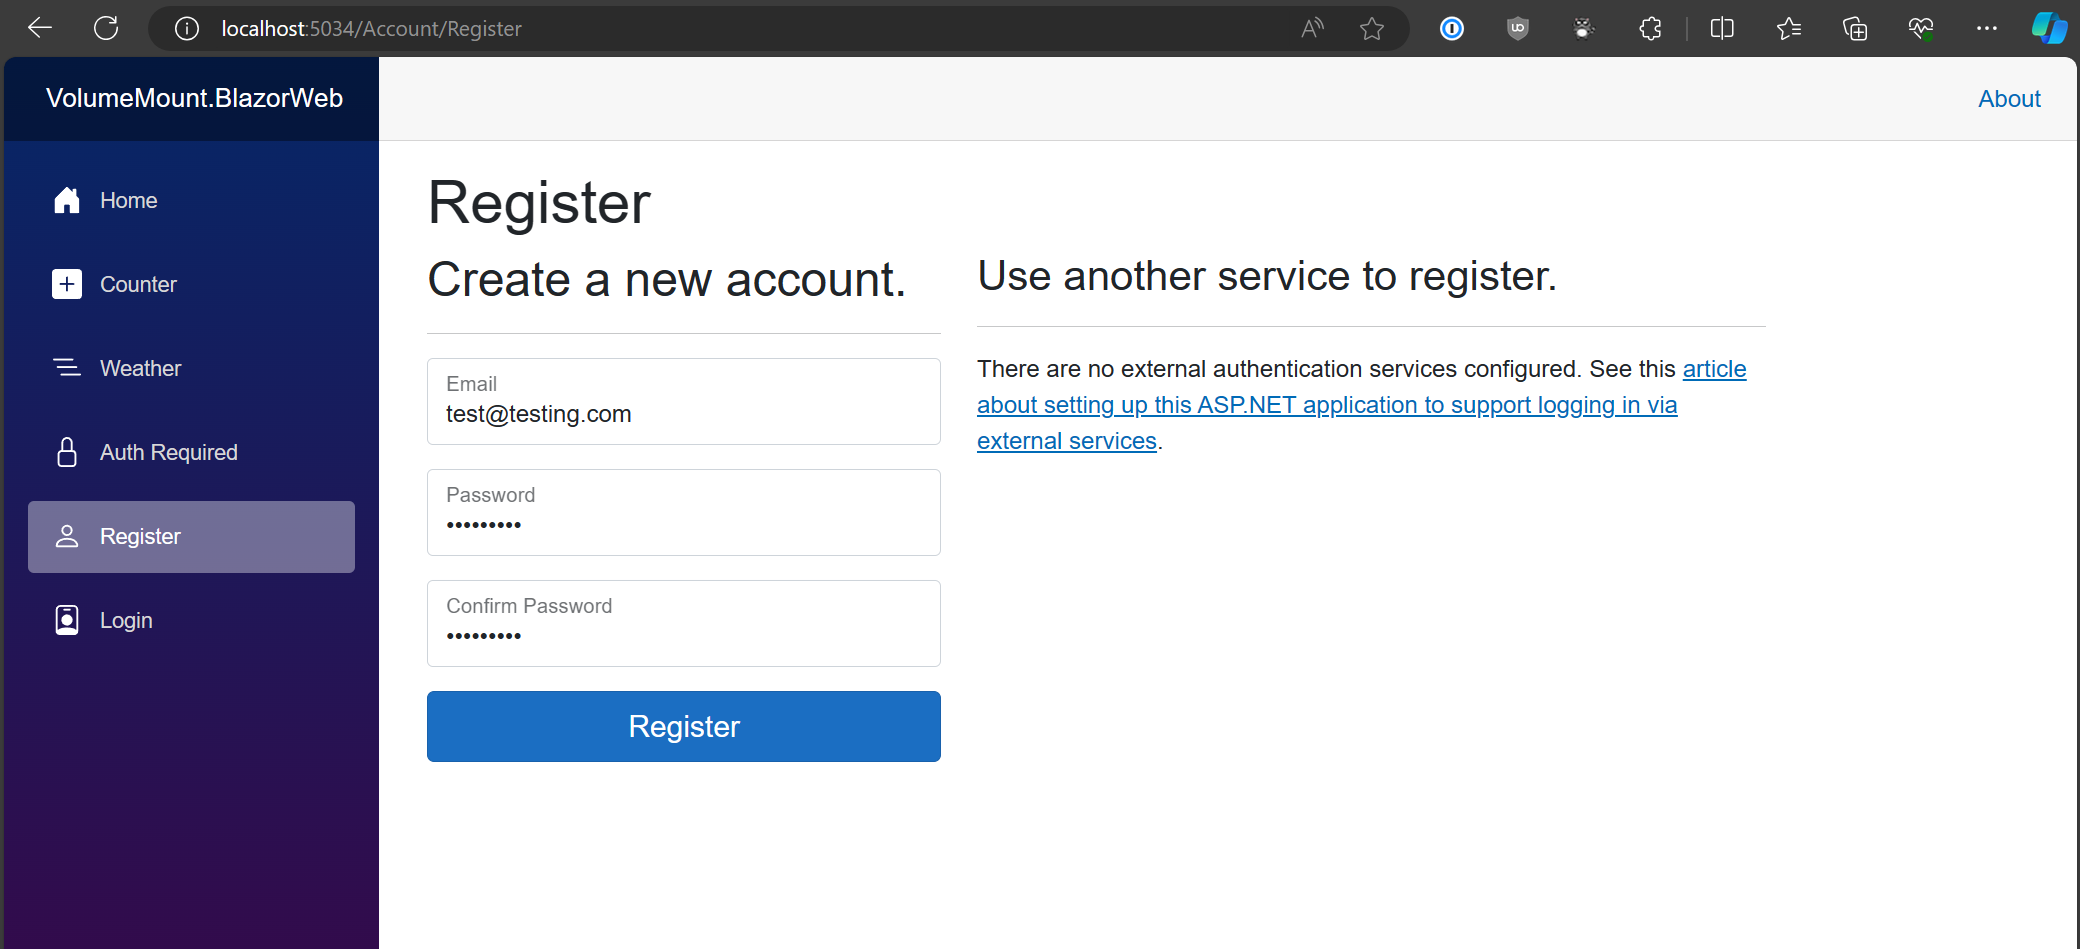 Screenshot of the account registration page on the web front end